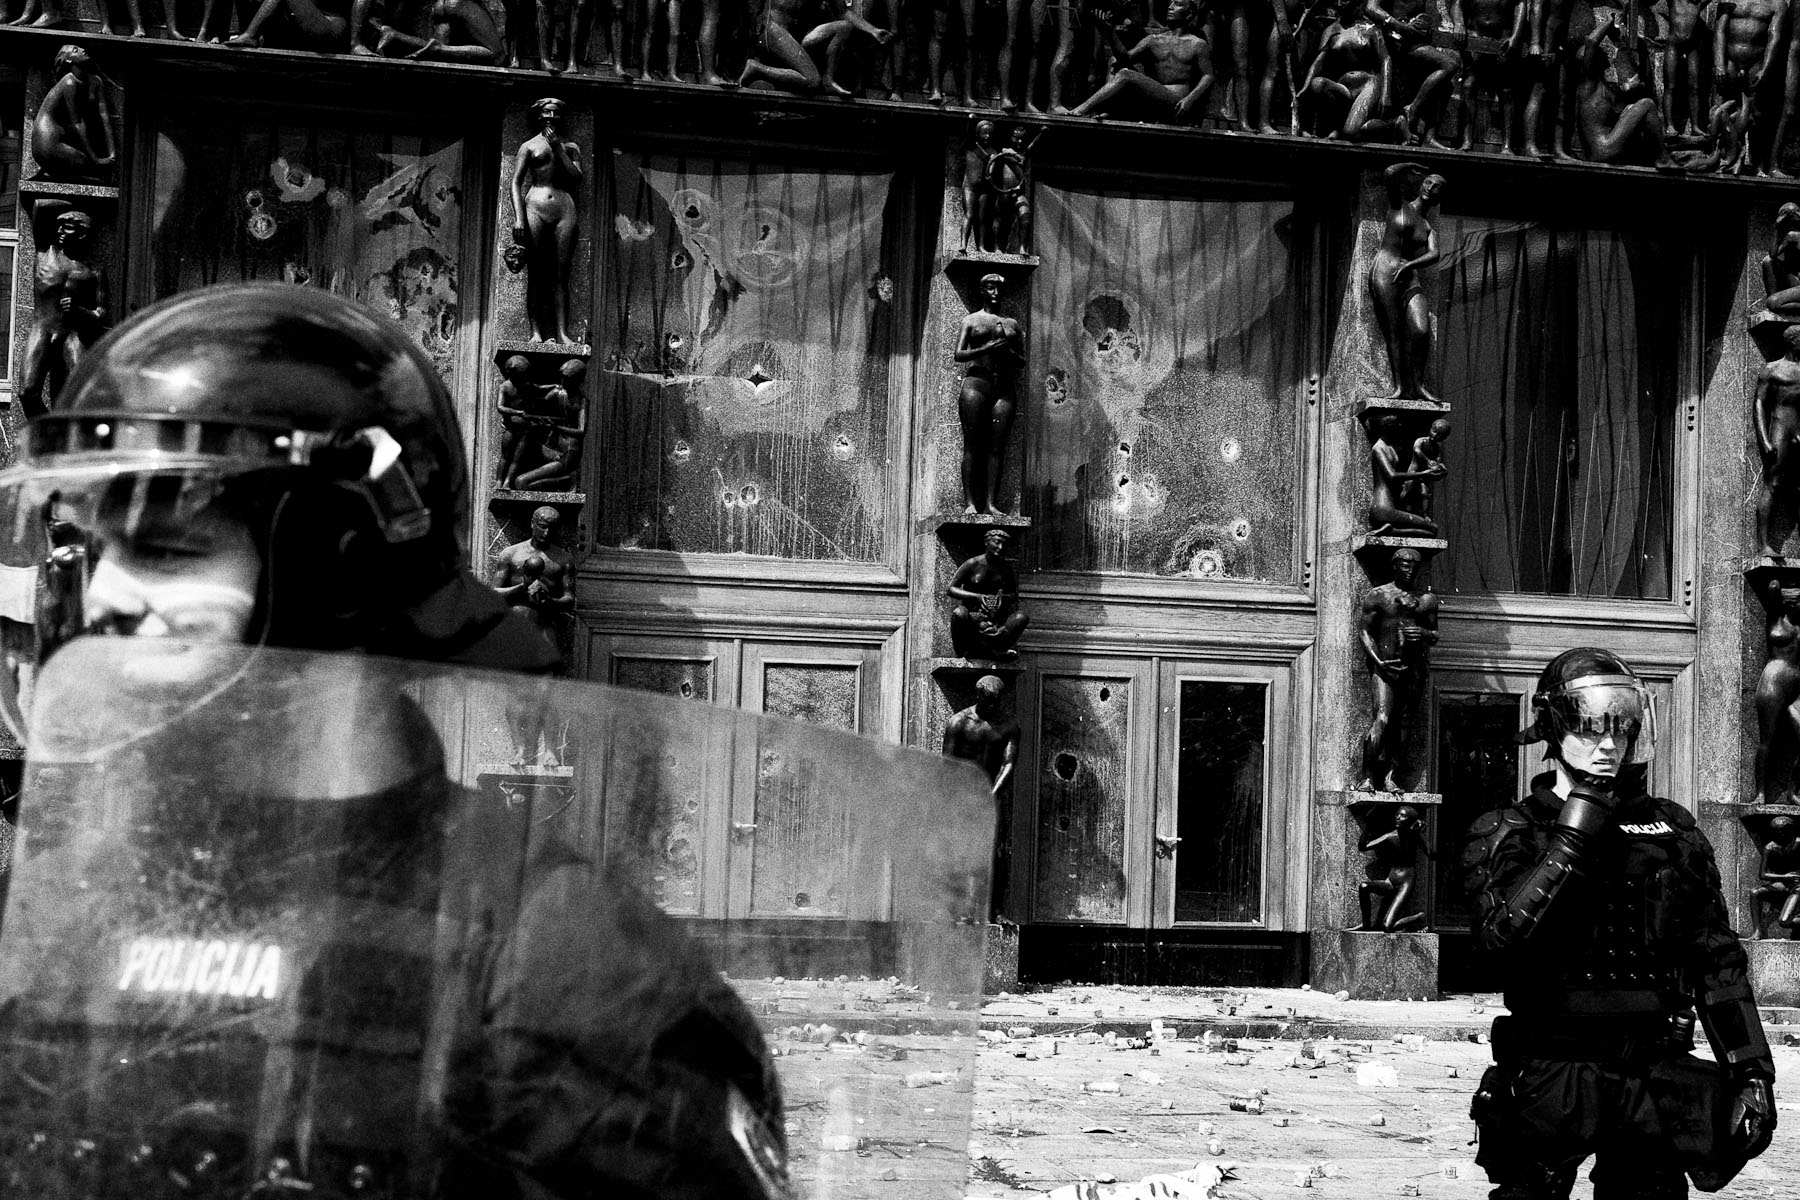 Riot police stand in front of a damaged entrance to the parliament building during anti-government student protests in Ljubljana, May 19, 2010.